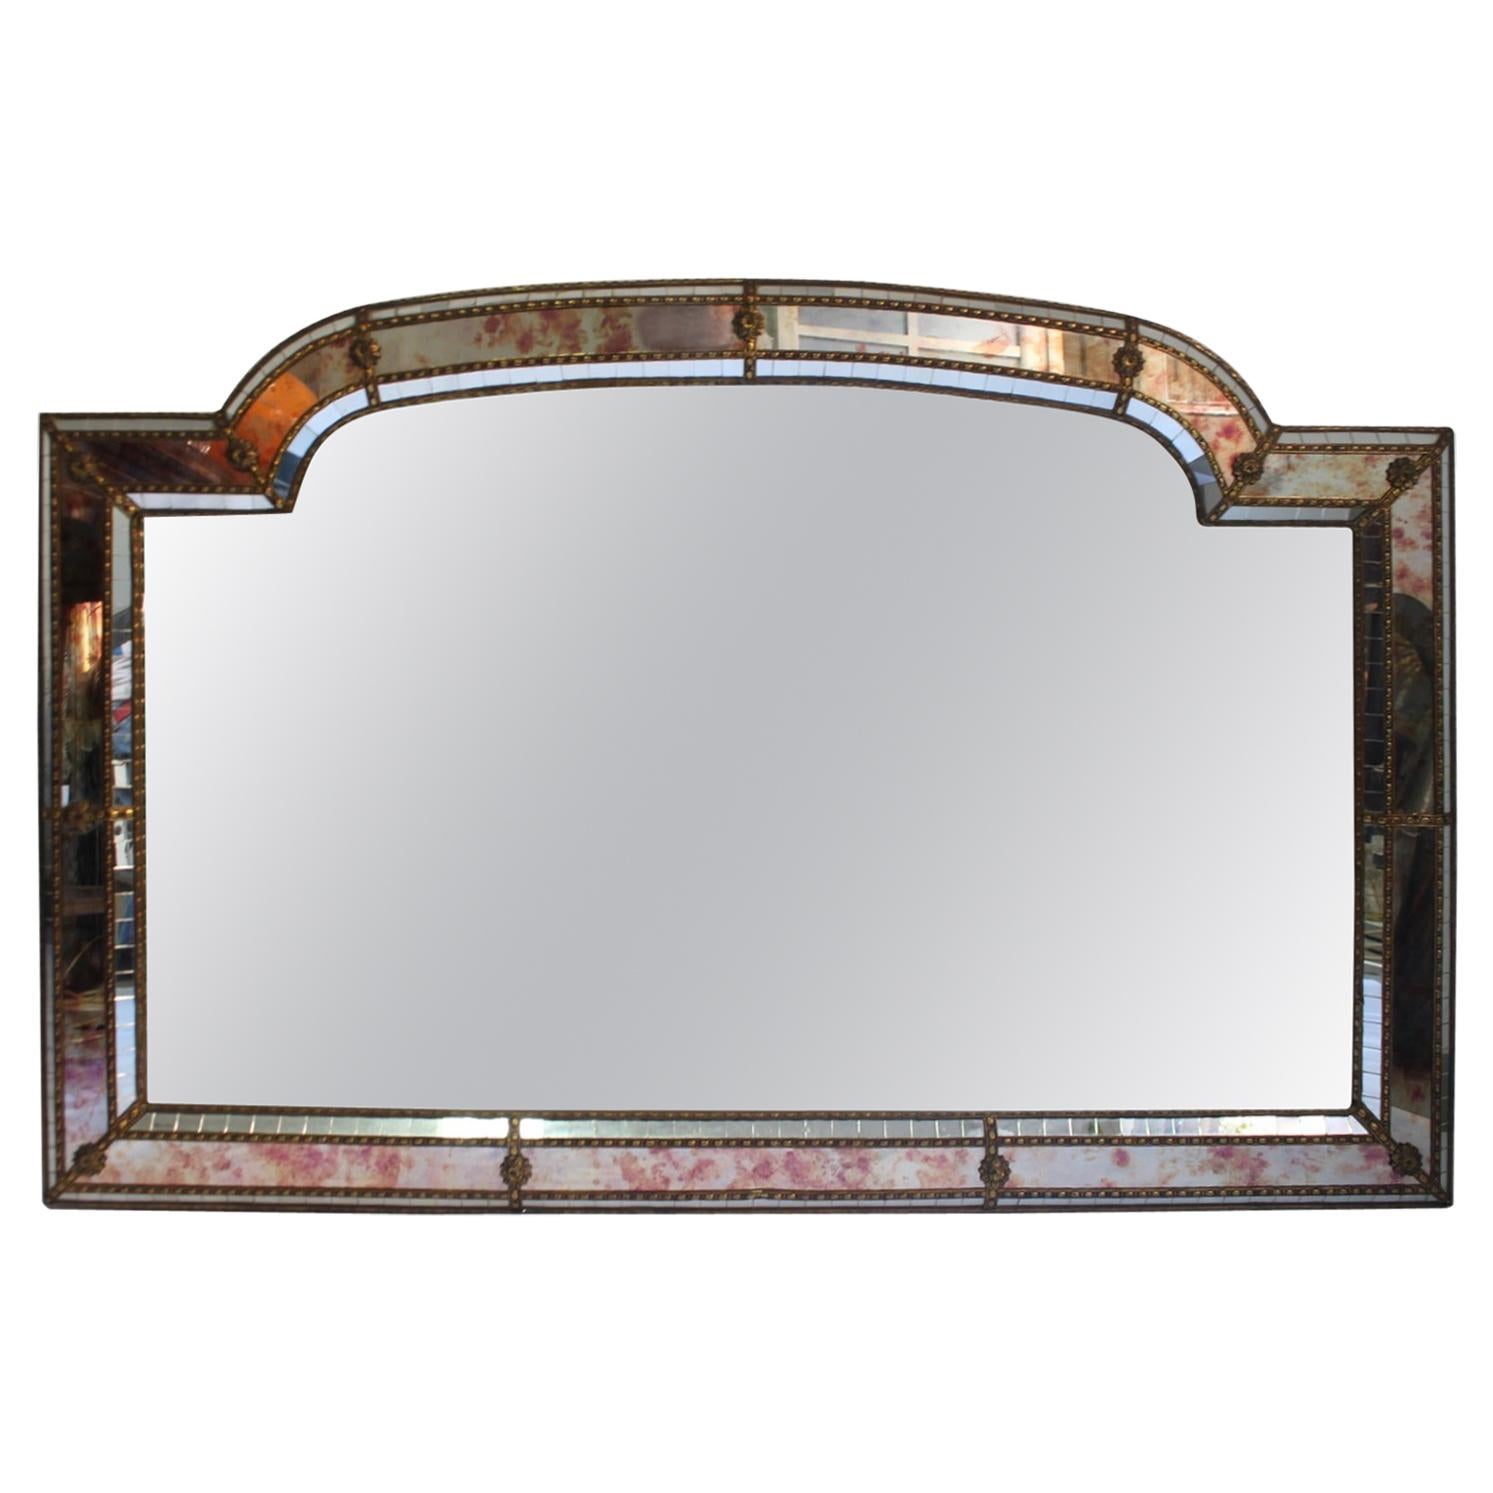 Midcentury Large Hollywood Regency Style Oil Drop Mosaic Wall Mirror, 1970s For Sale